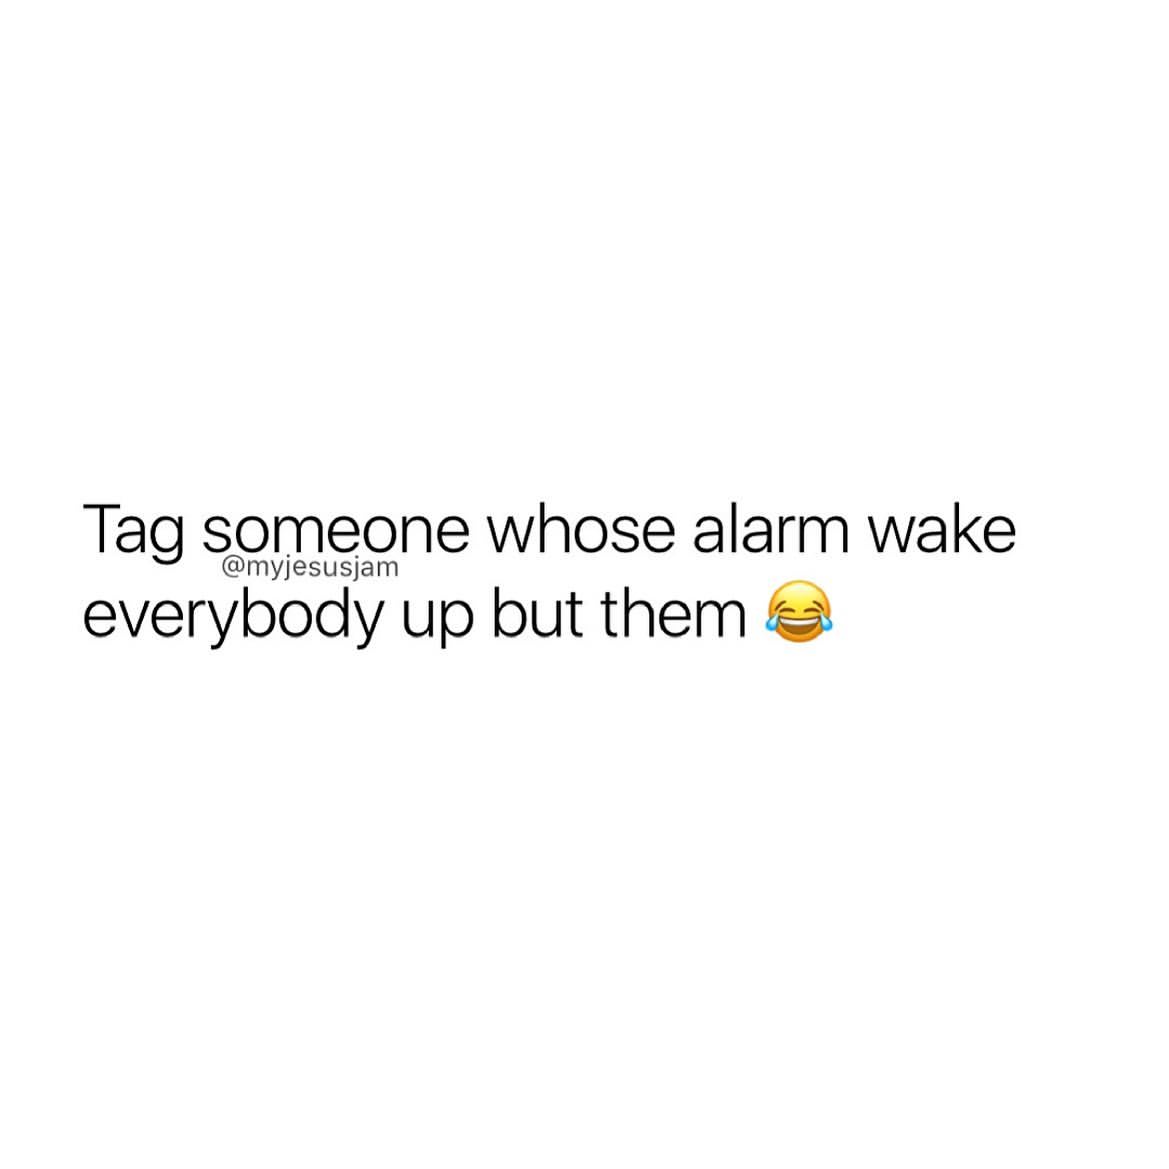 Tag someone whose alarm wake everybody up but them.